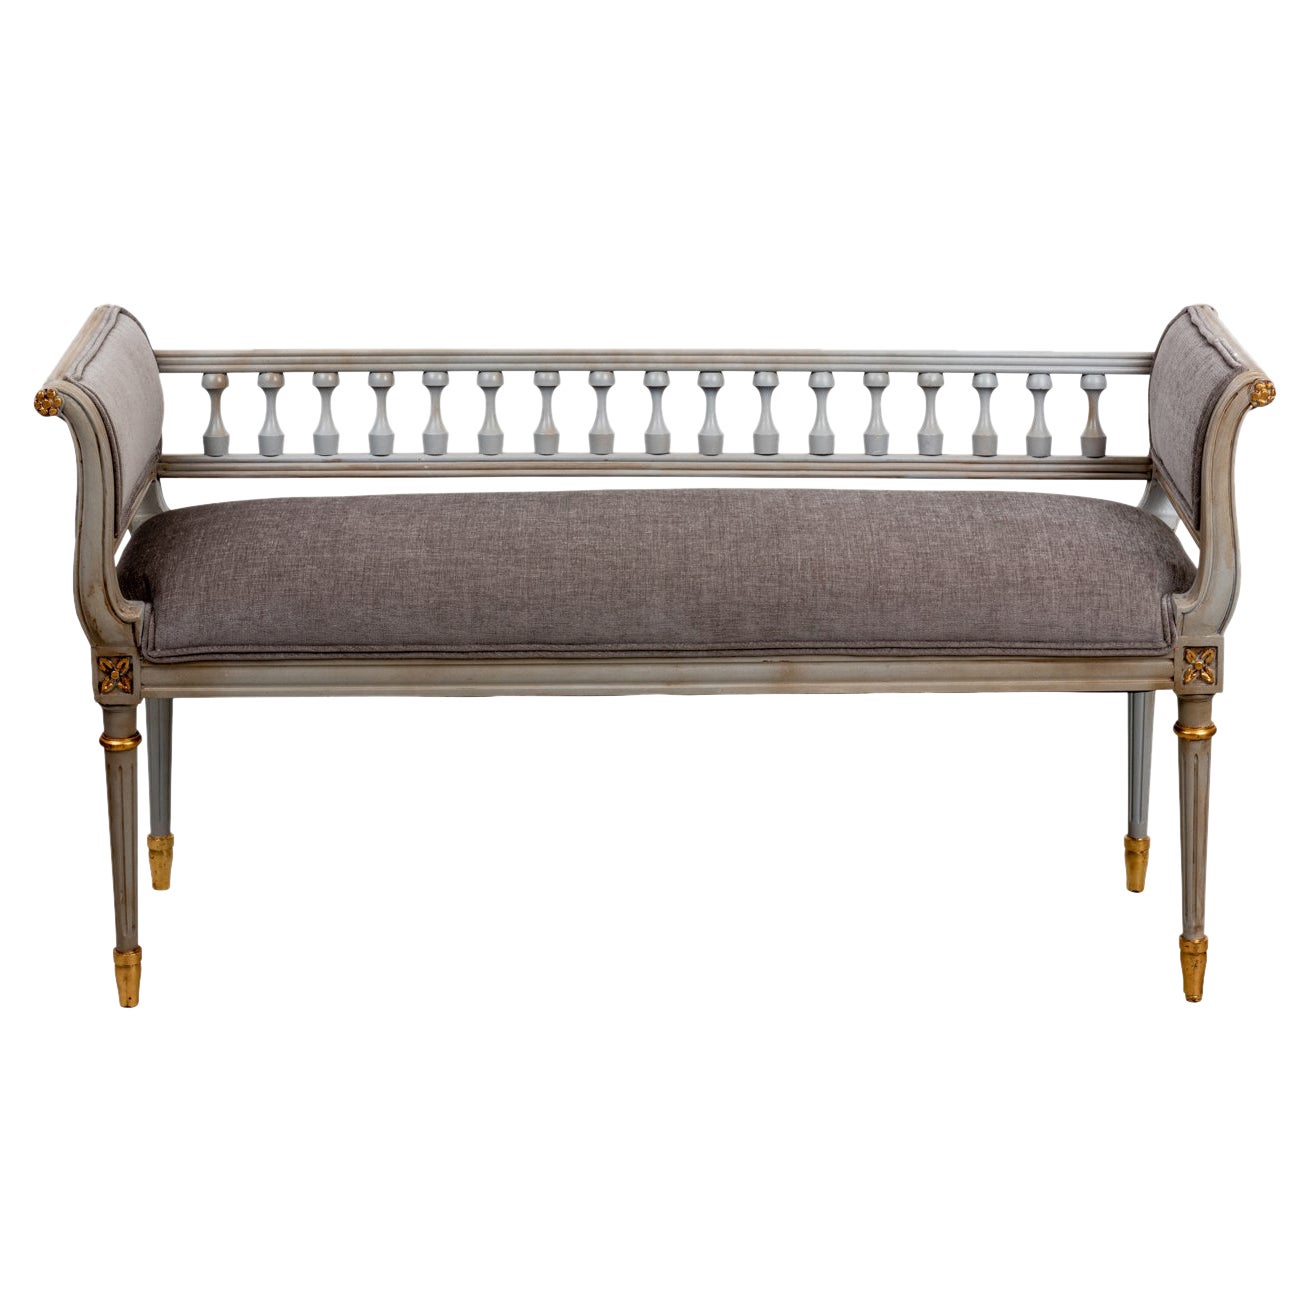 Louis XVI Style Painted Gilded Bench